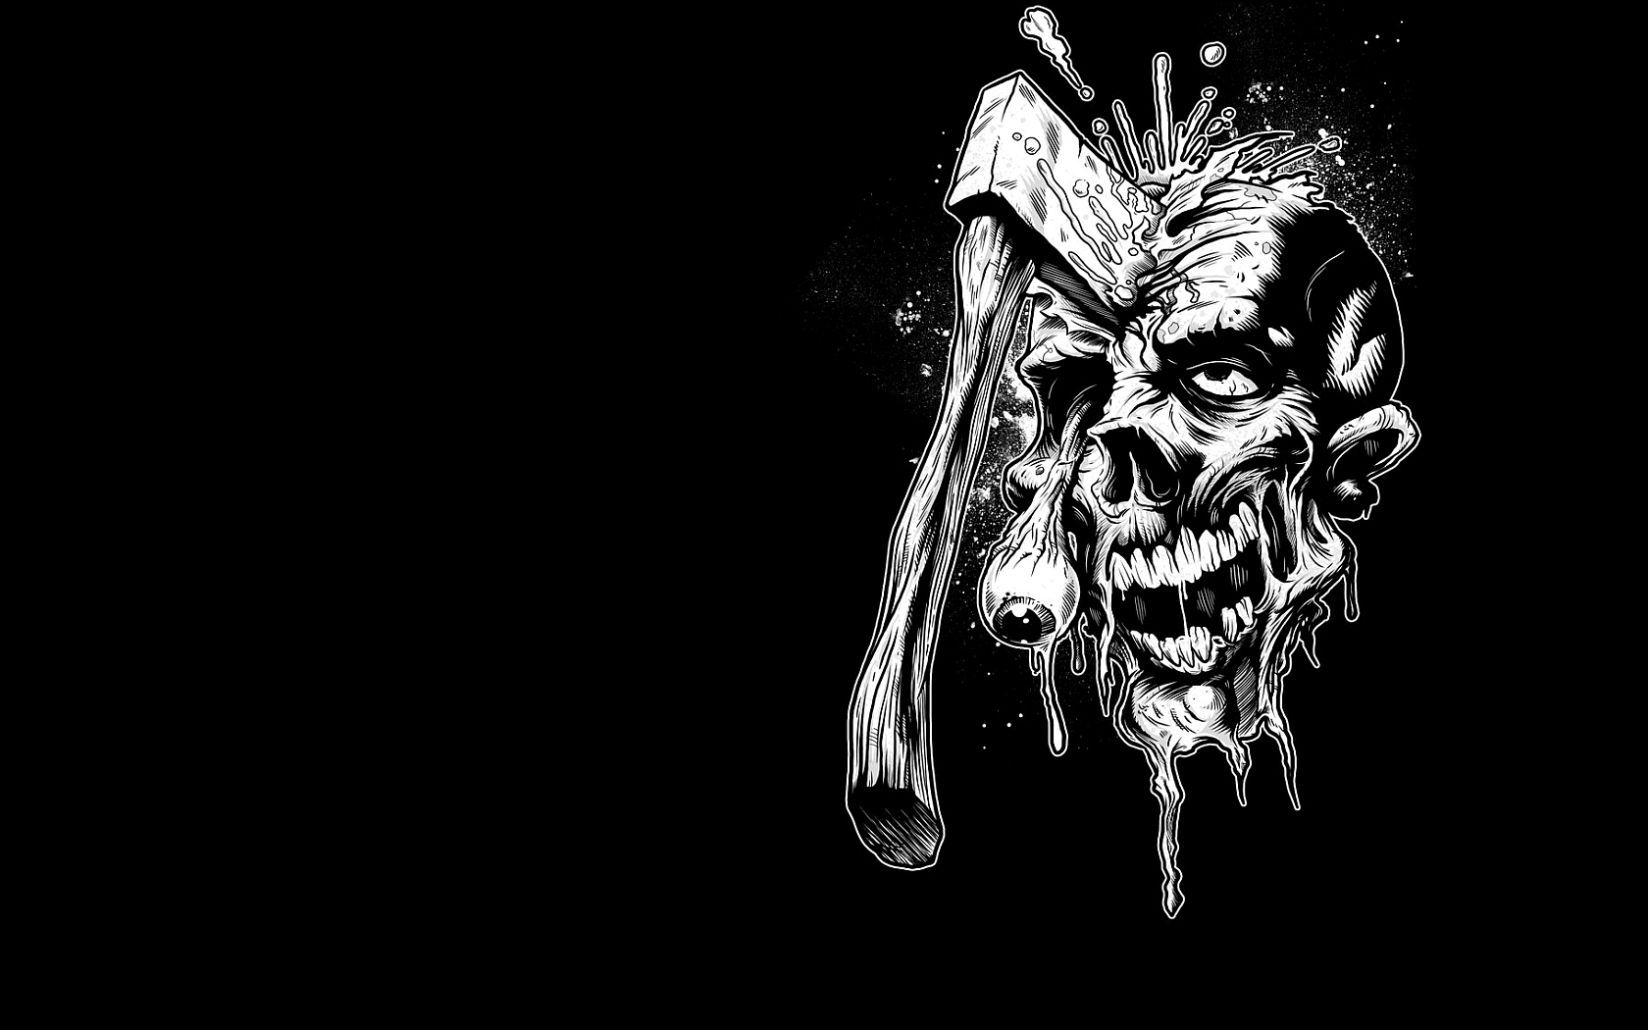 HD Zombie Wallpapers | HD Wallpapers For Windows 8